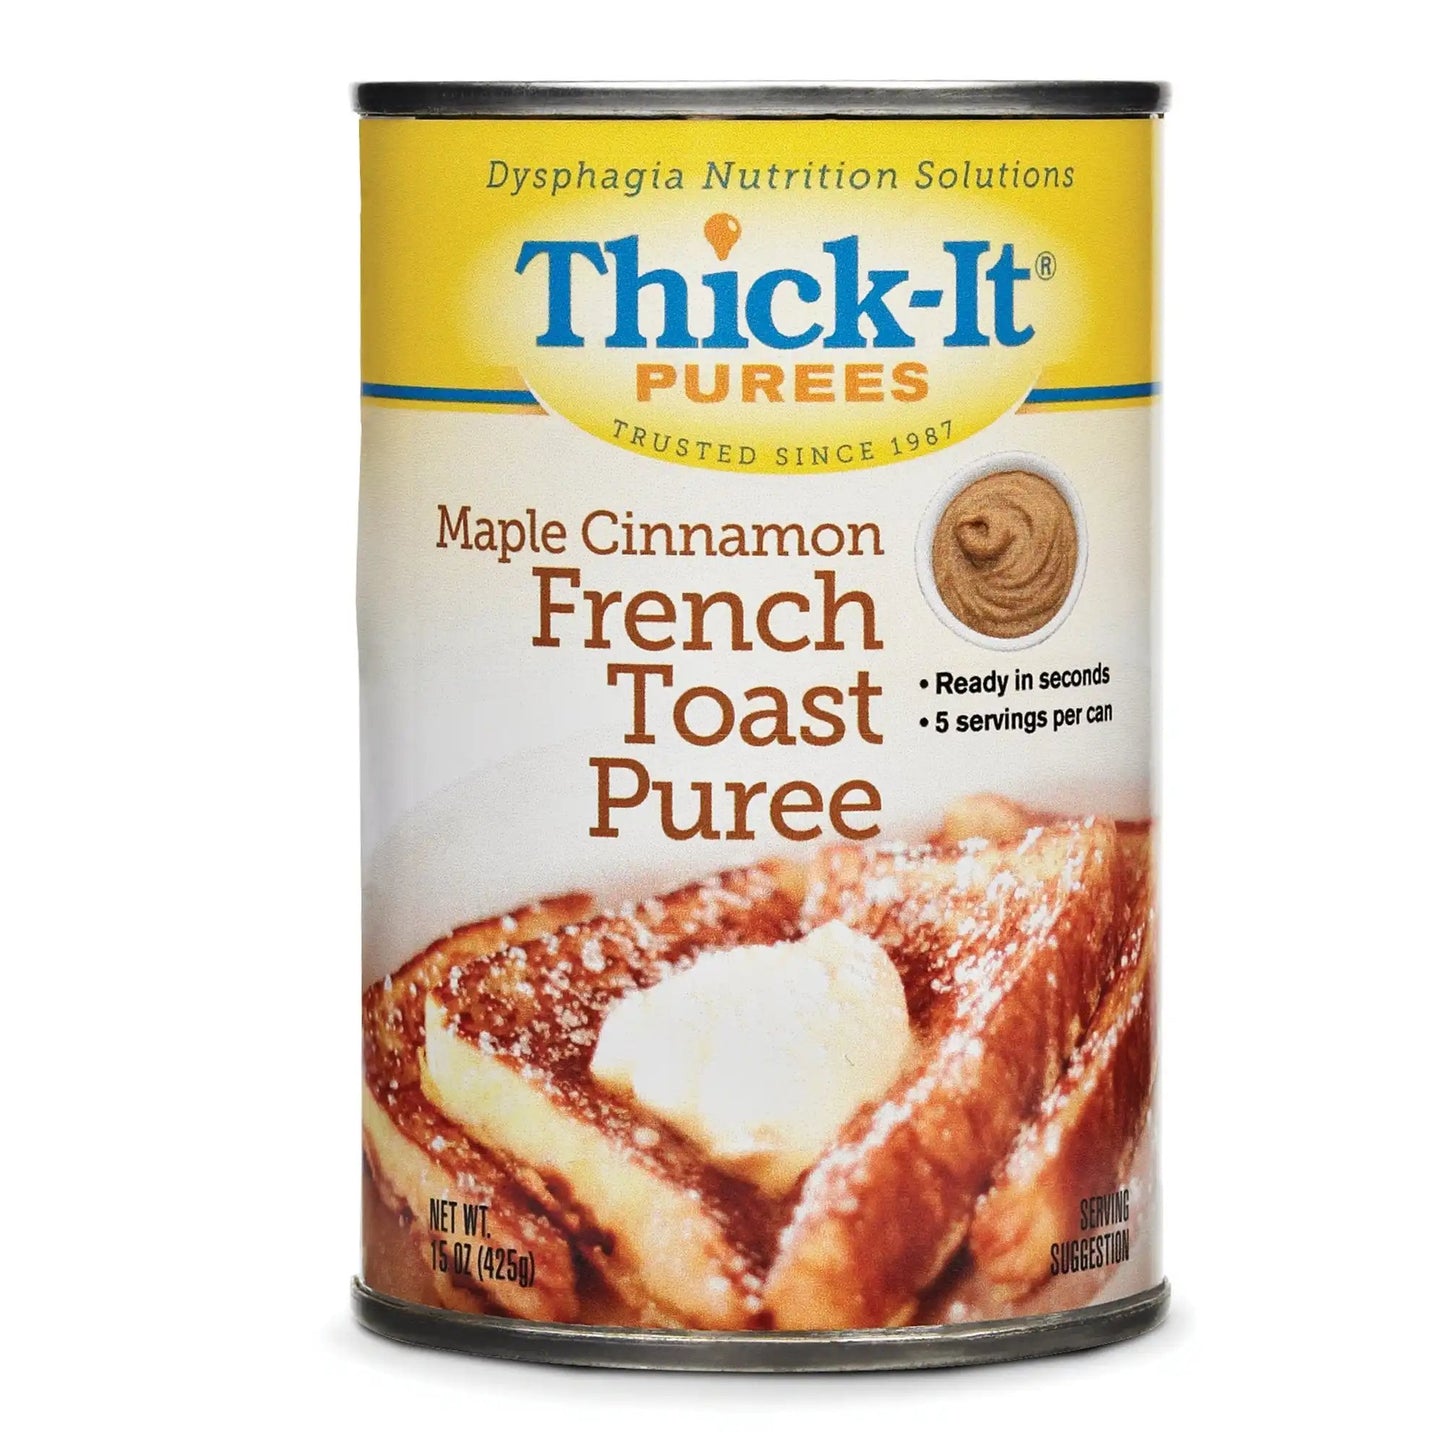 Thick-It Maple Cinnamon French Toast Purée, 15 oz.